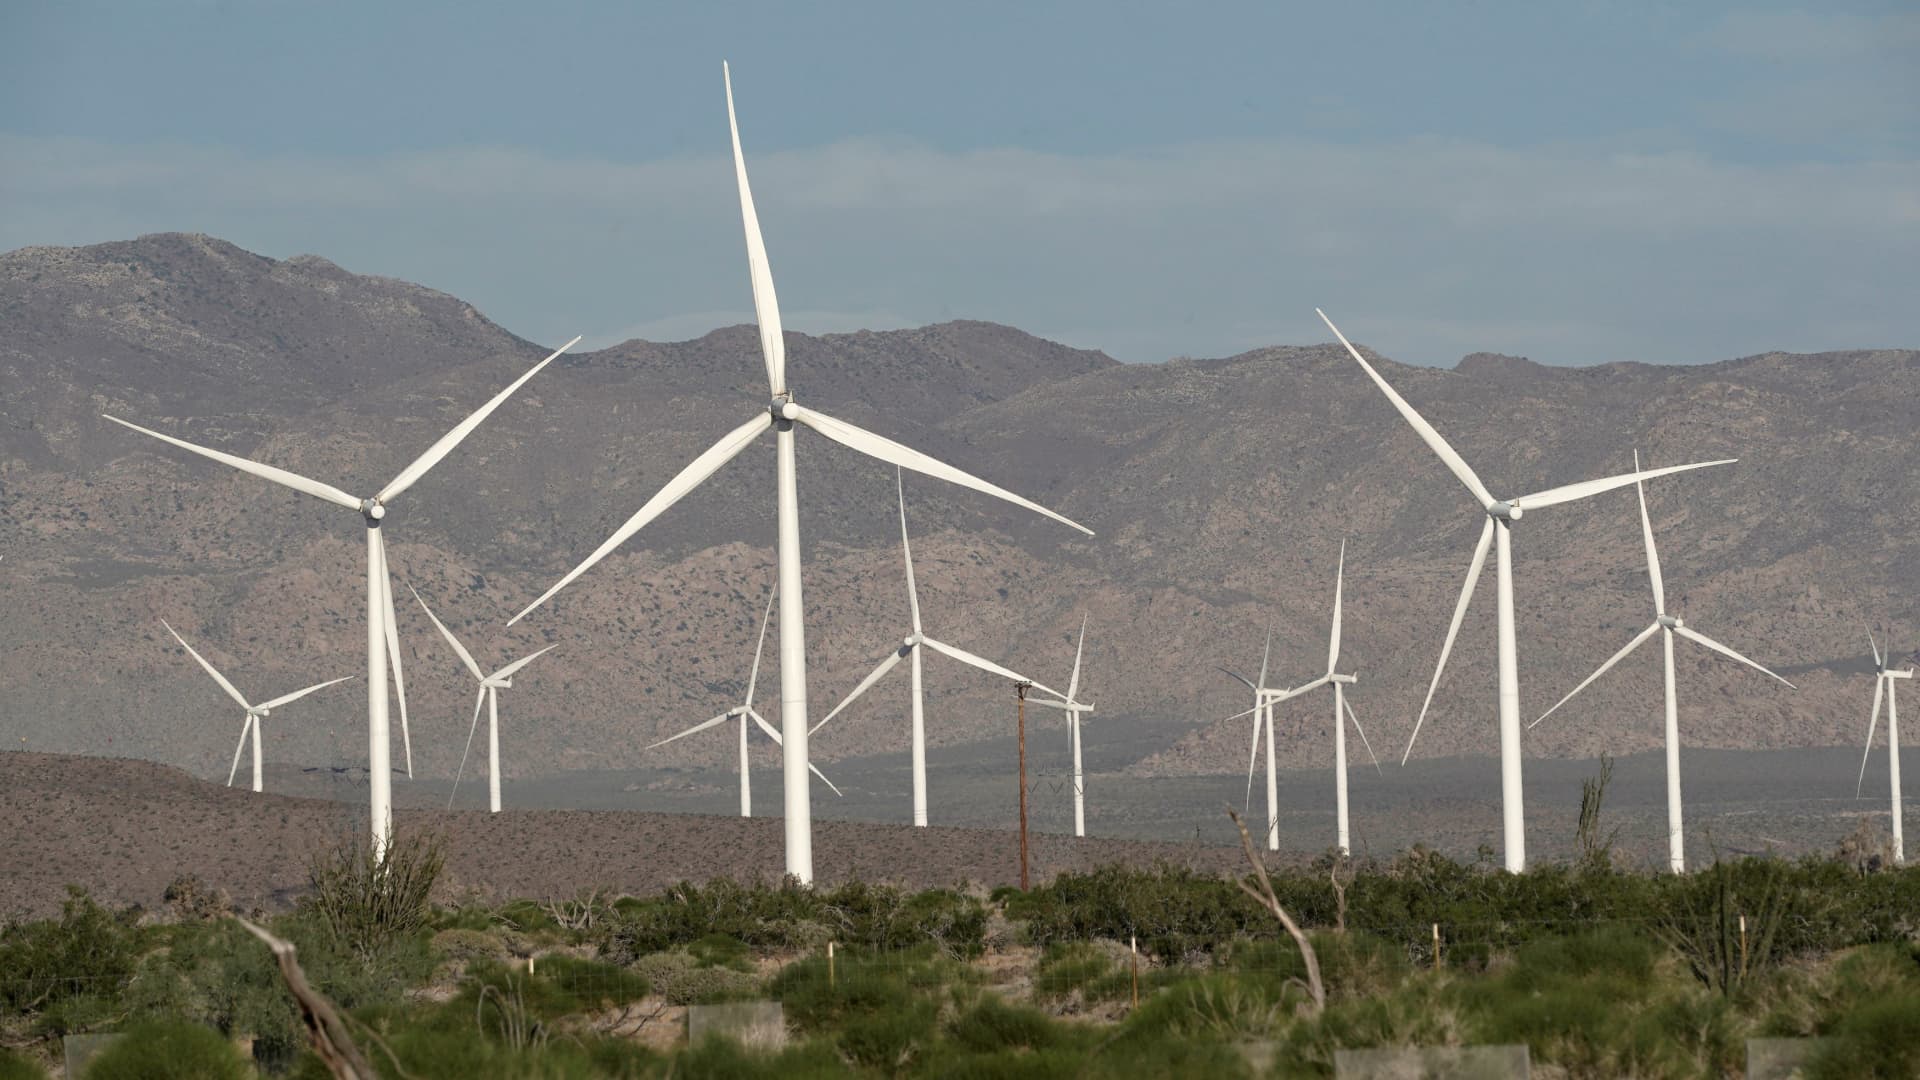 Siemens Energy shares jump 13% as firm plans leadership change at wind turbine unit [Video]